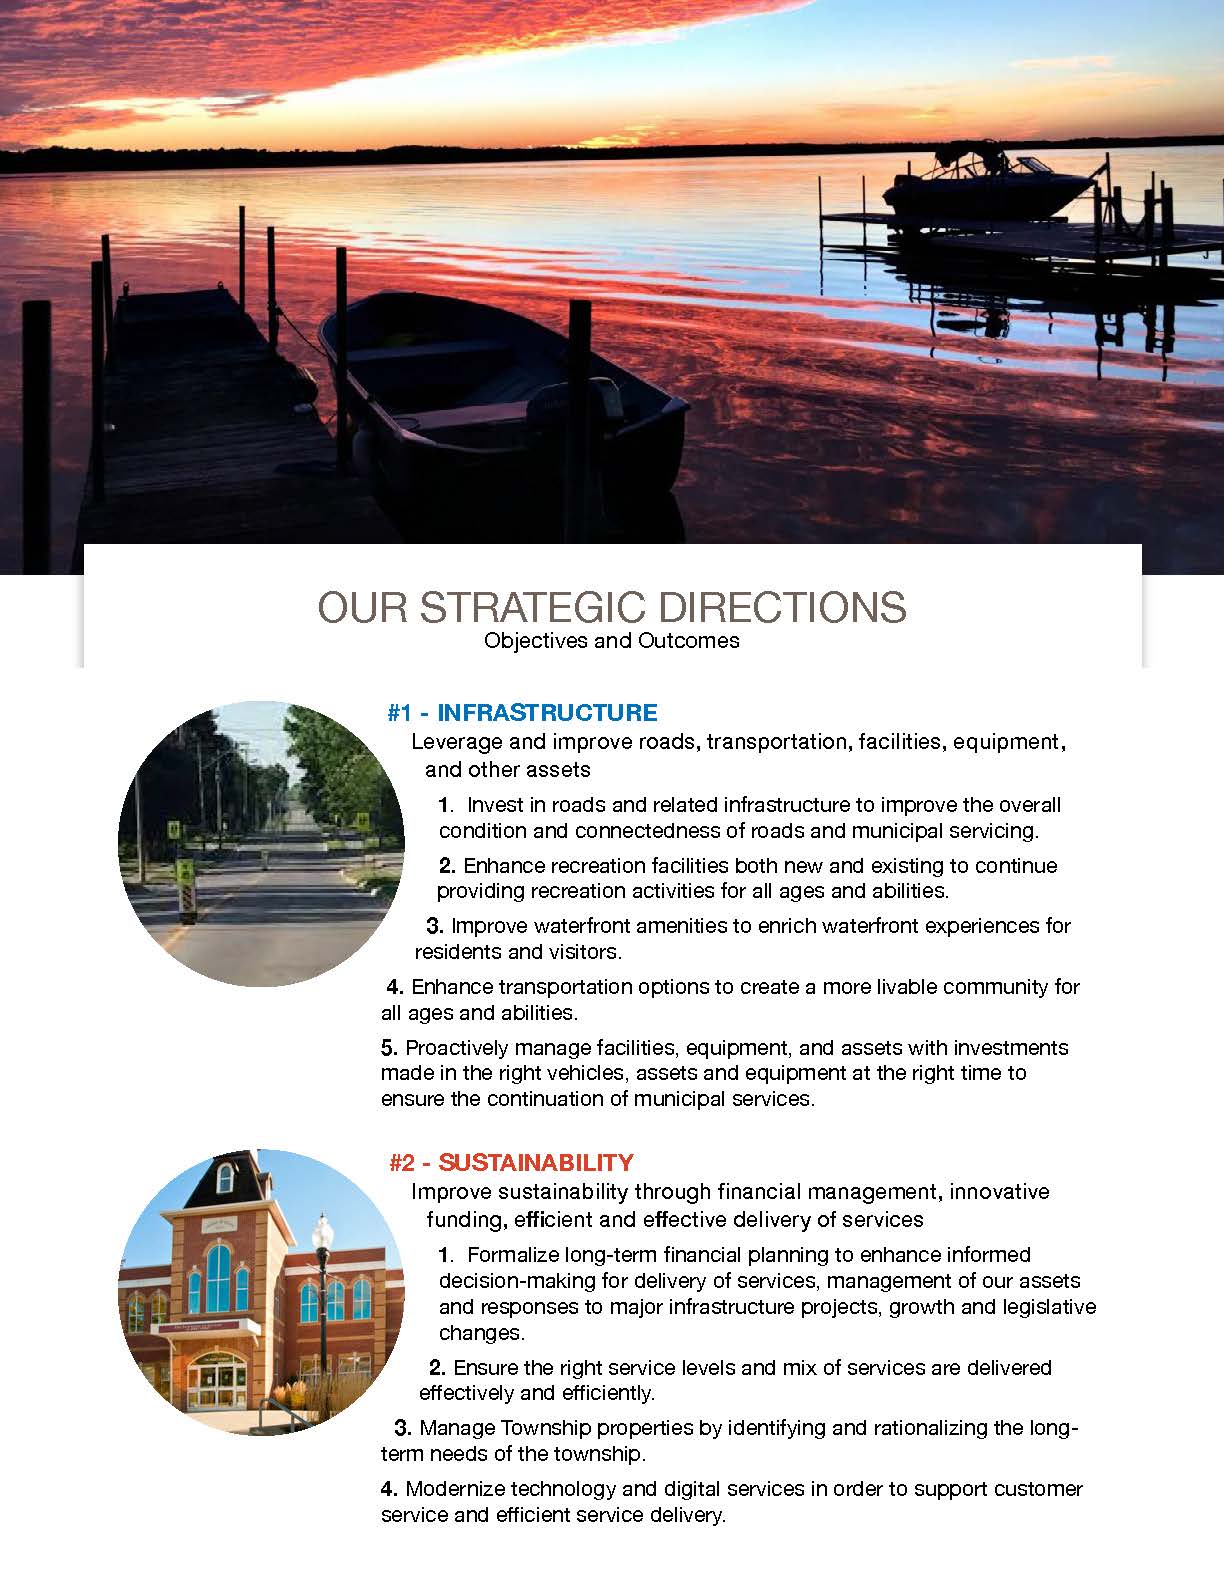 Scugog images with Strategic Direction #1 Infrastructure and #2 Sustainability